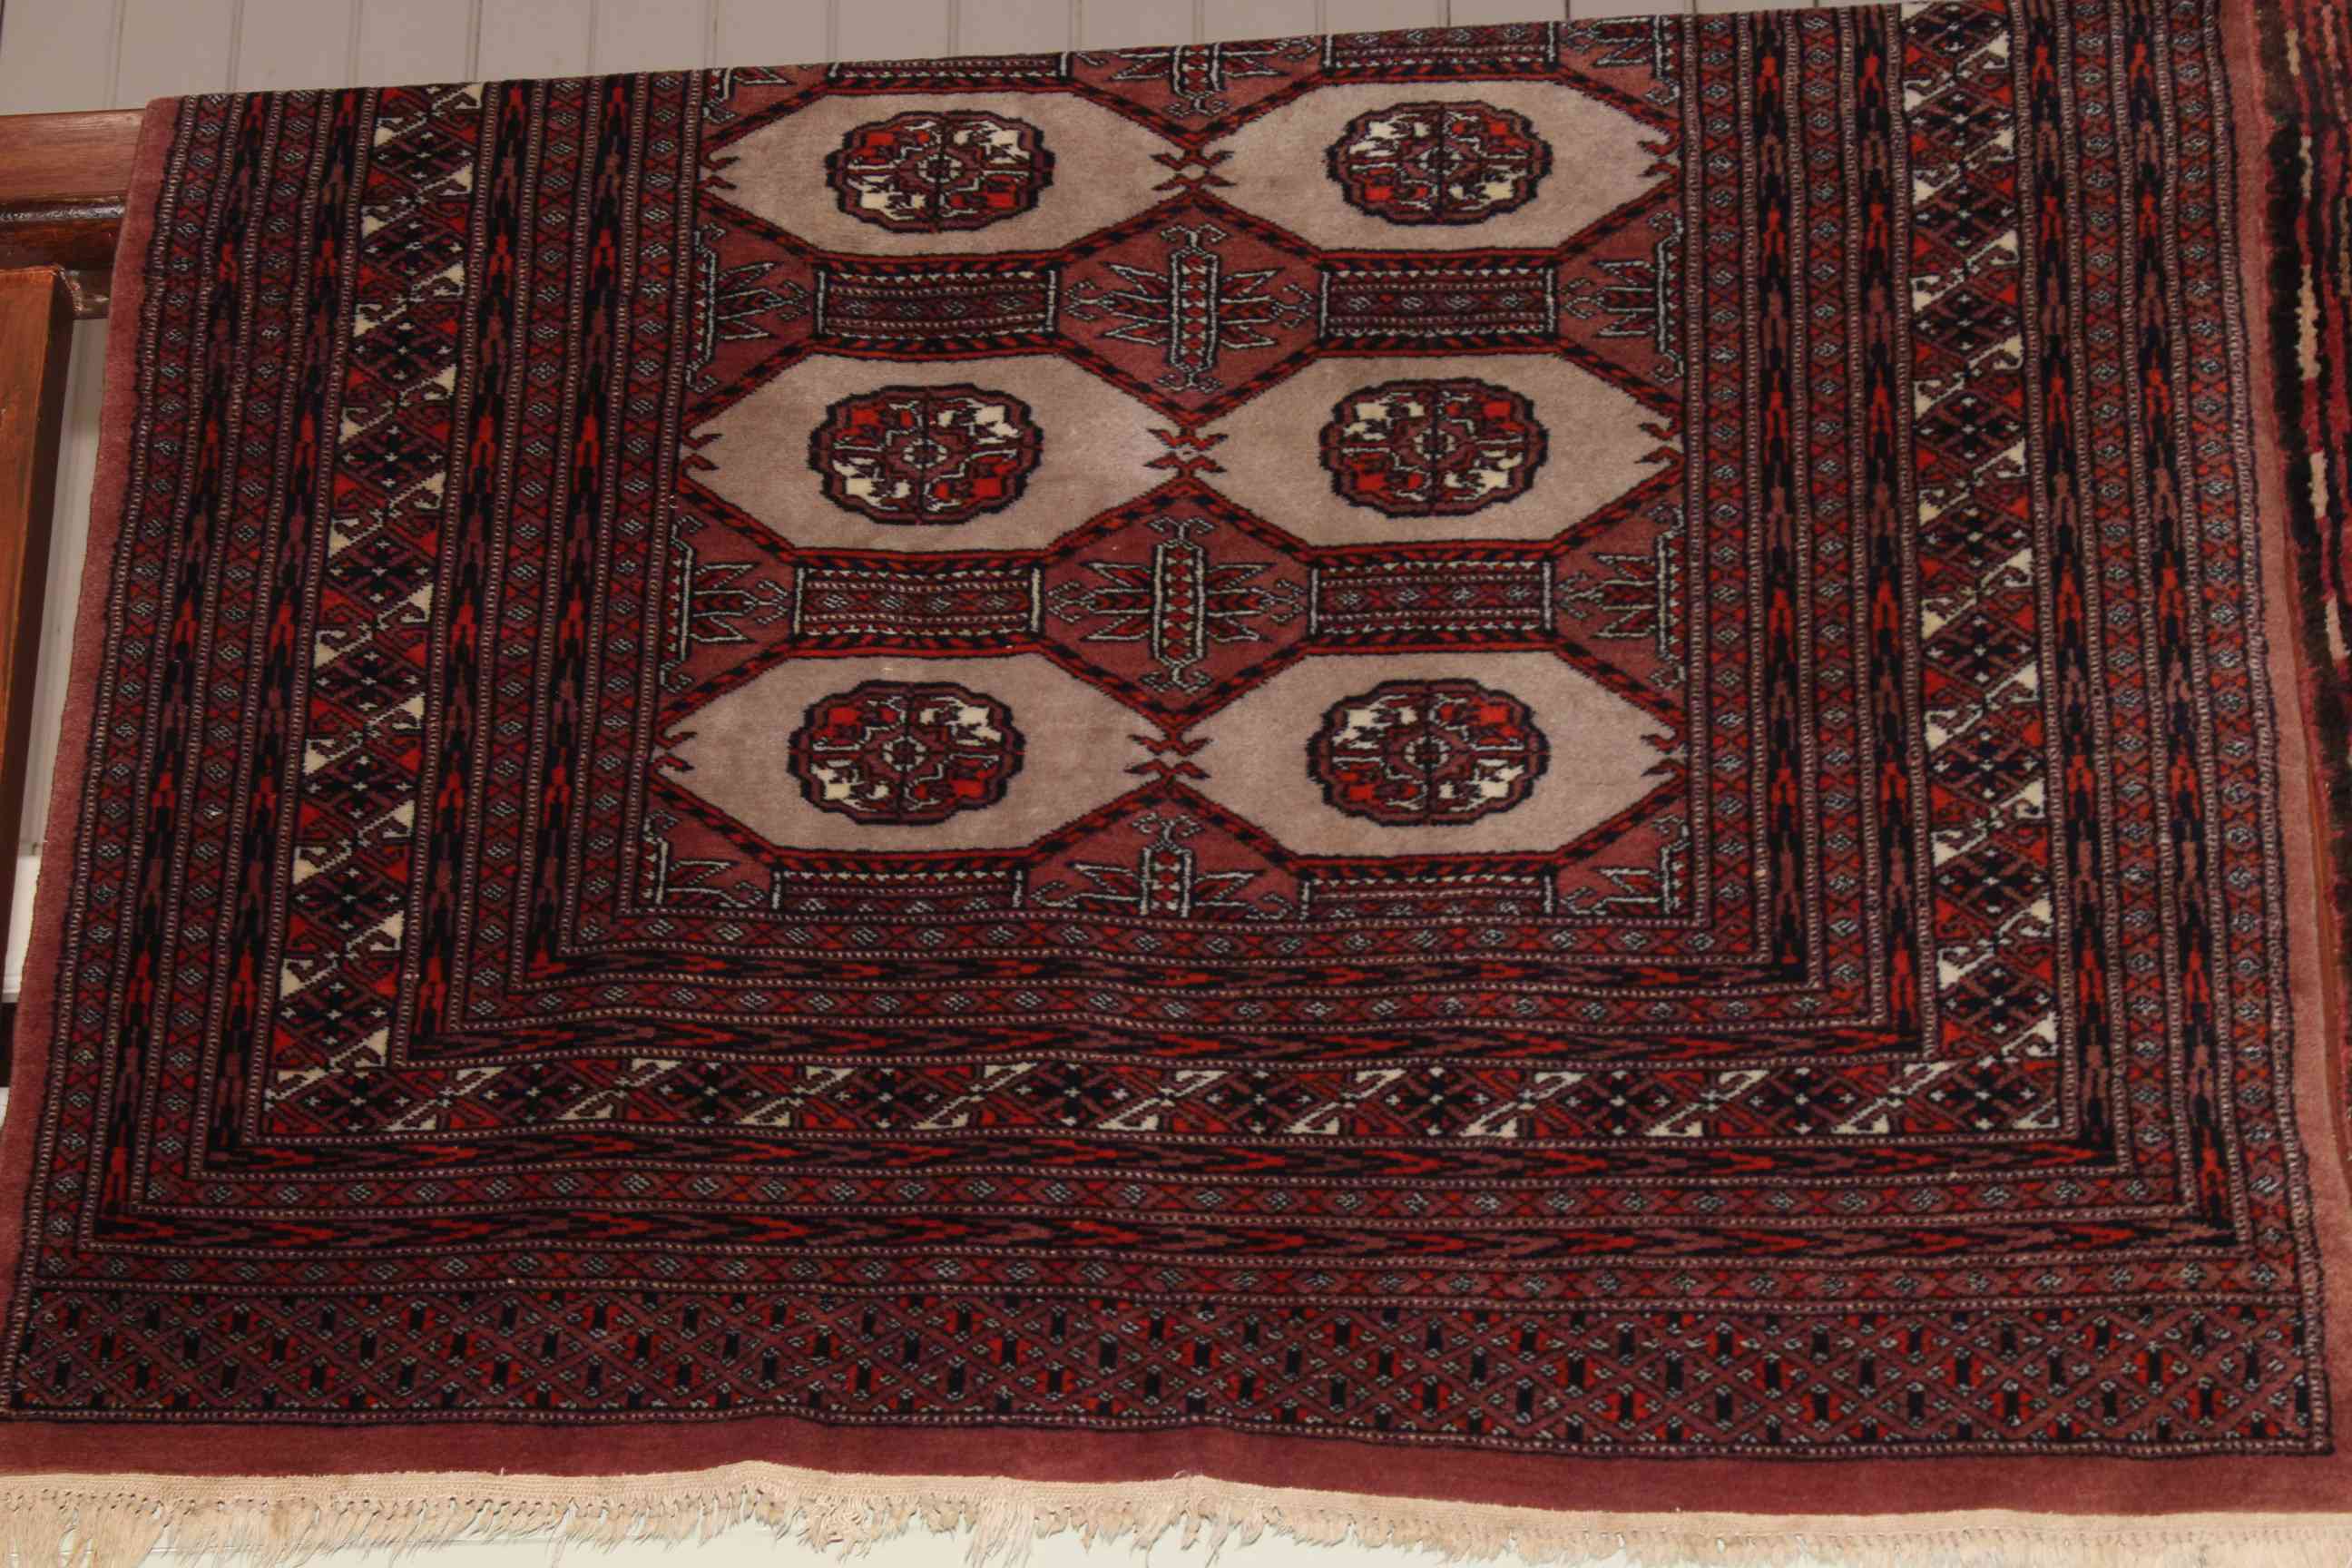 Persian design rug 1.90 by 1.30.